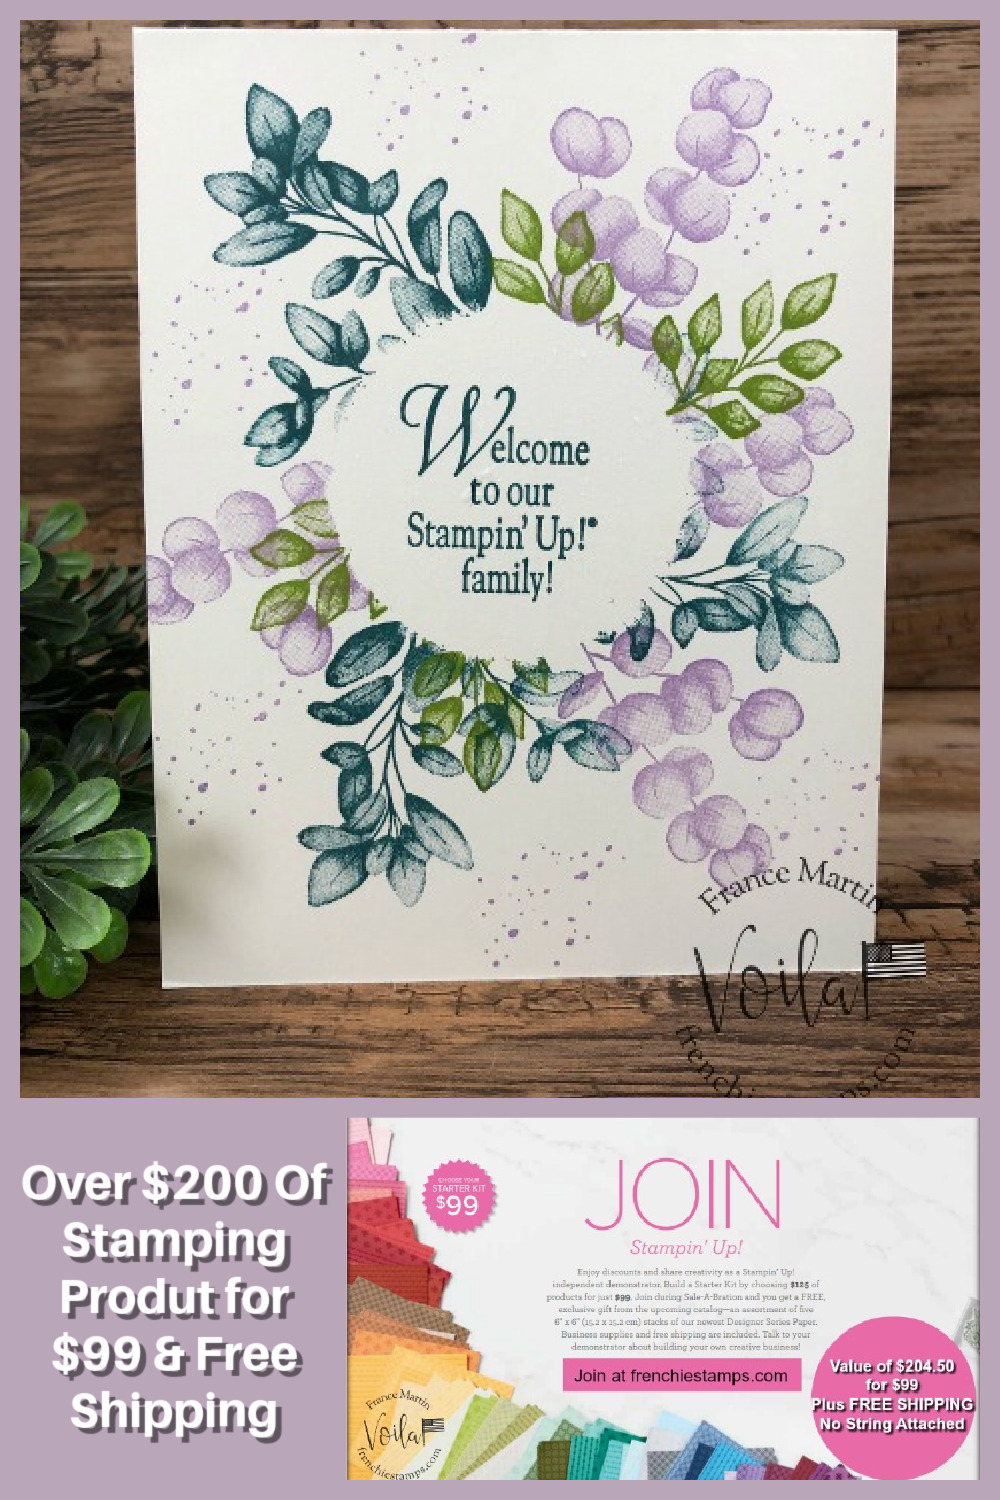 How to get over $200 of Stampin\'Up!® Product for $99 and Free Shipping